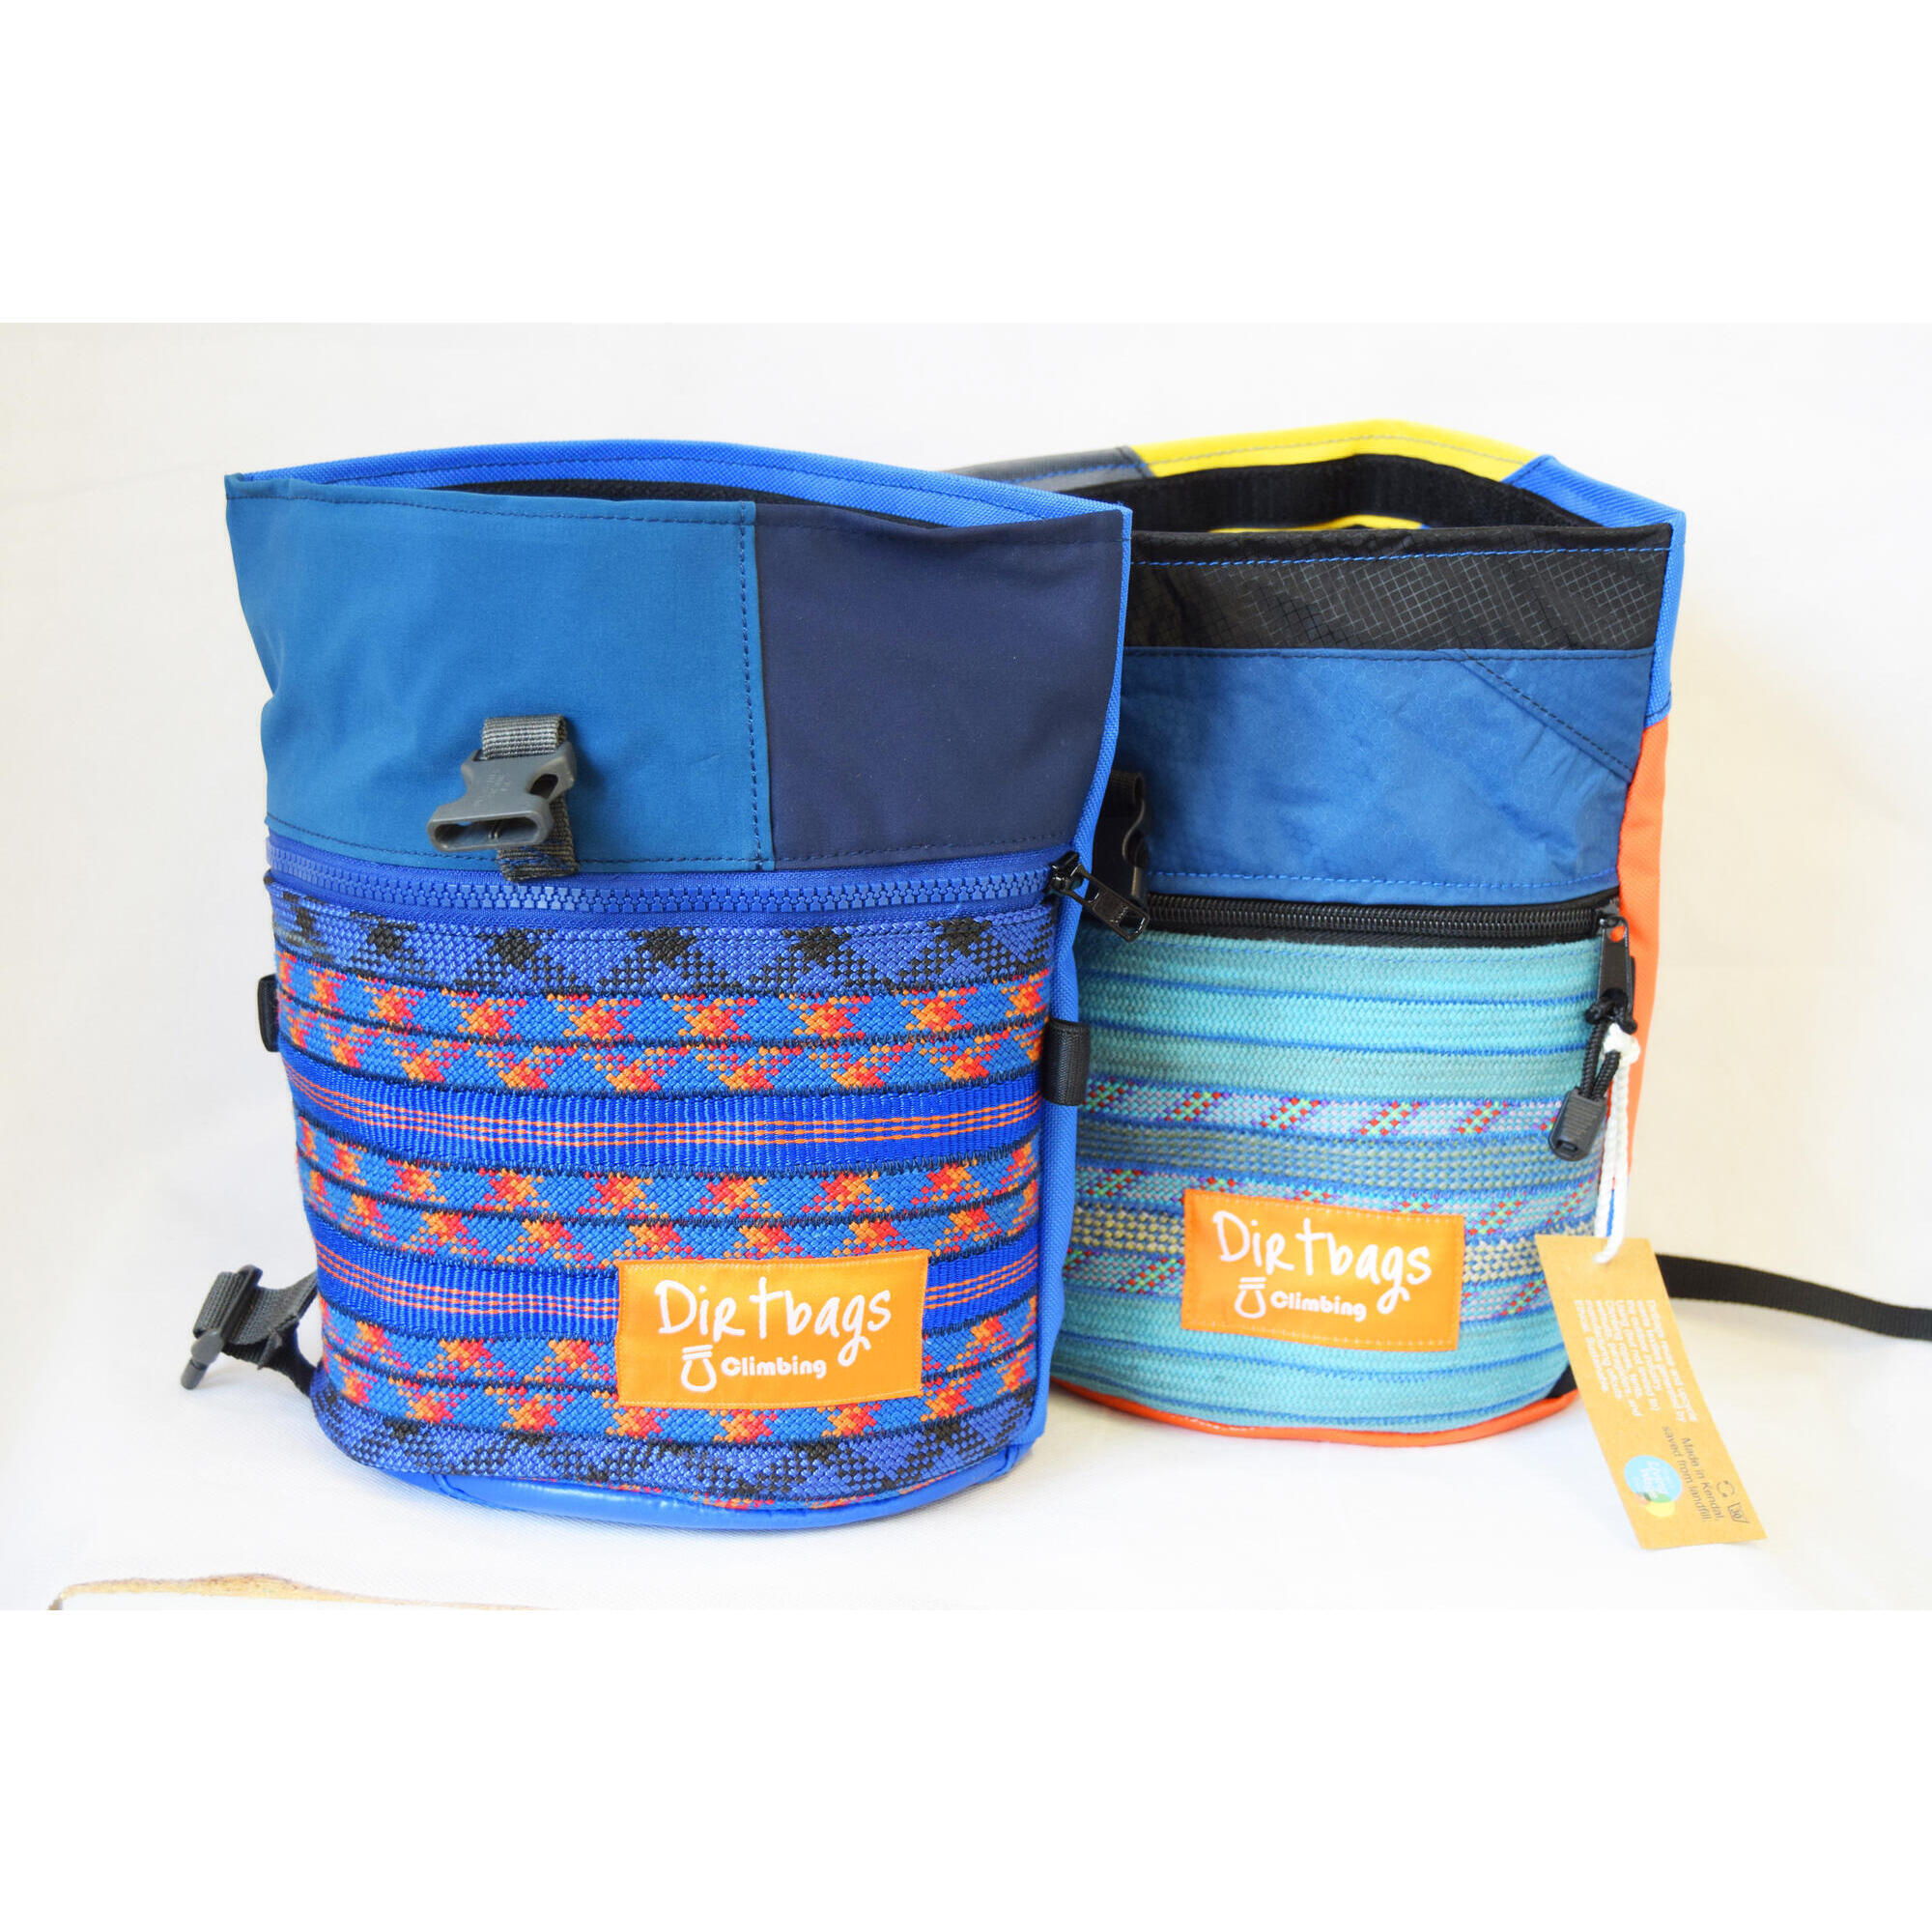 DIRTBAGS CLIMBING Boulder bag made with recycled climbing rope and upcycled fabric. Blue/ purple